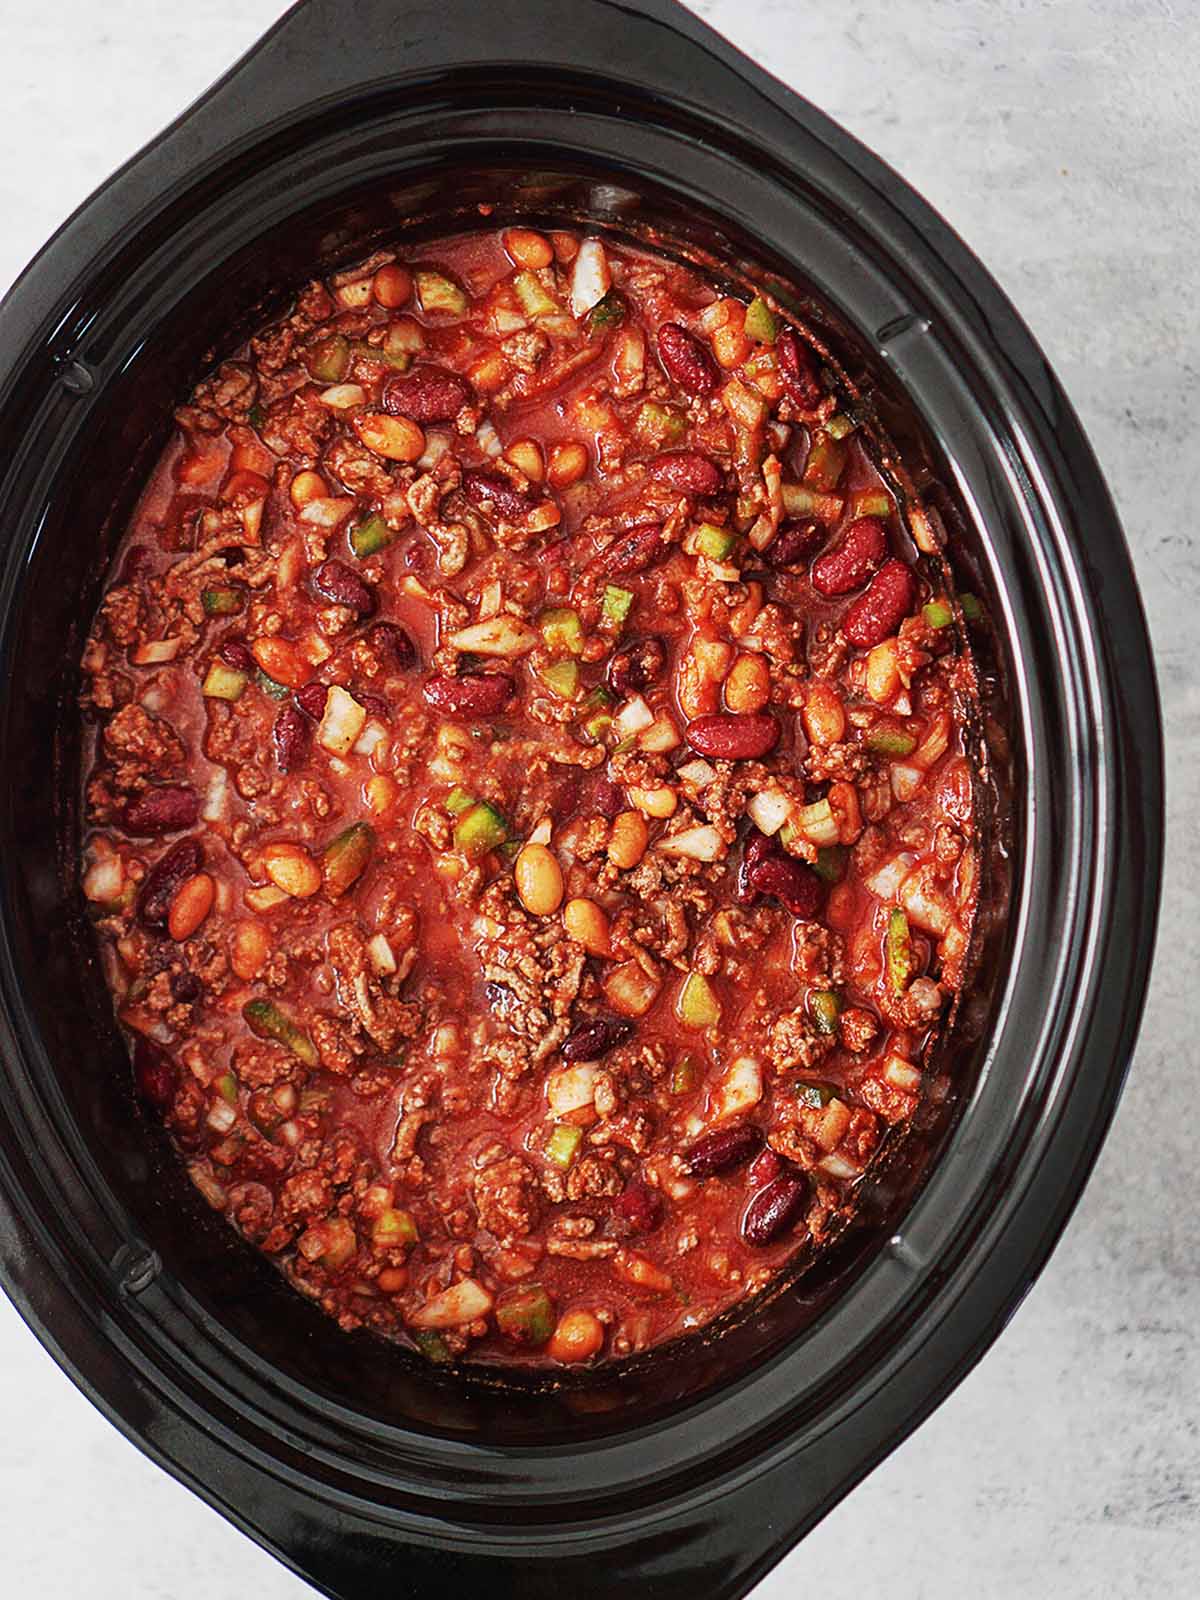 Beef chili in the dish of a crockpot.